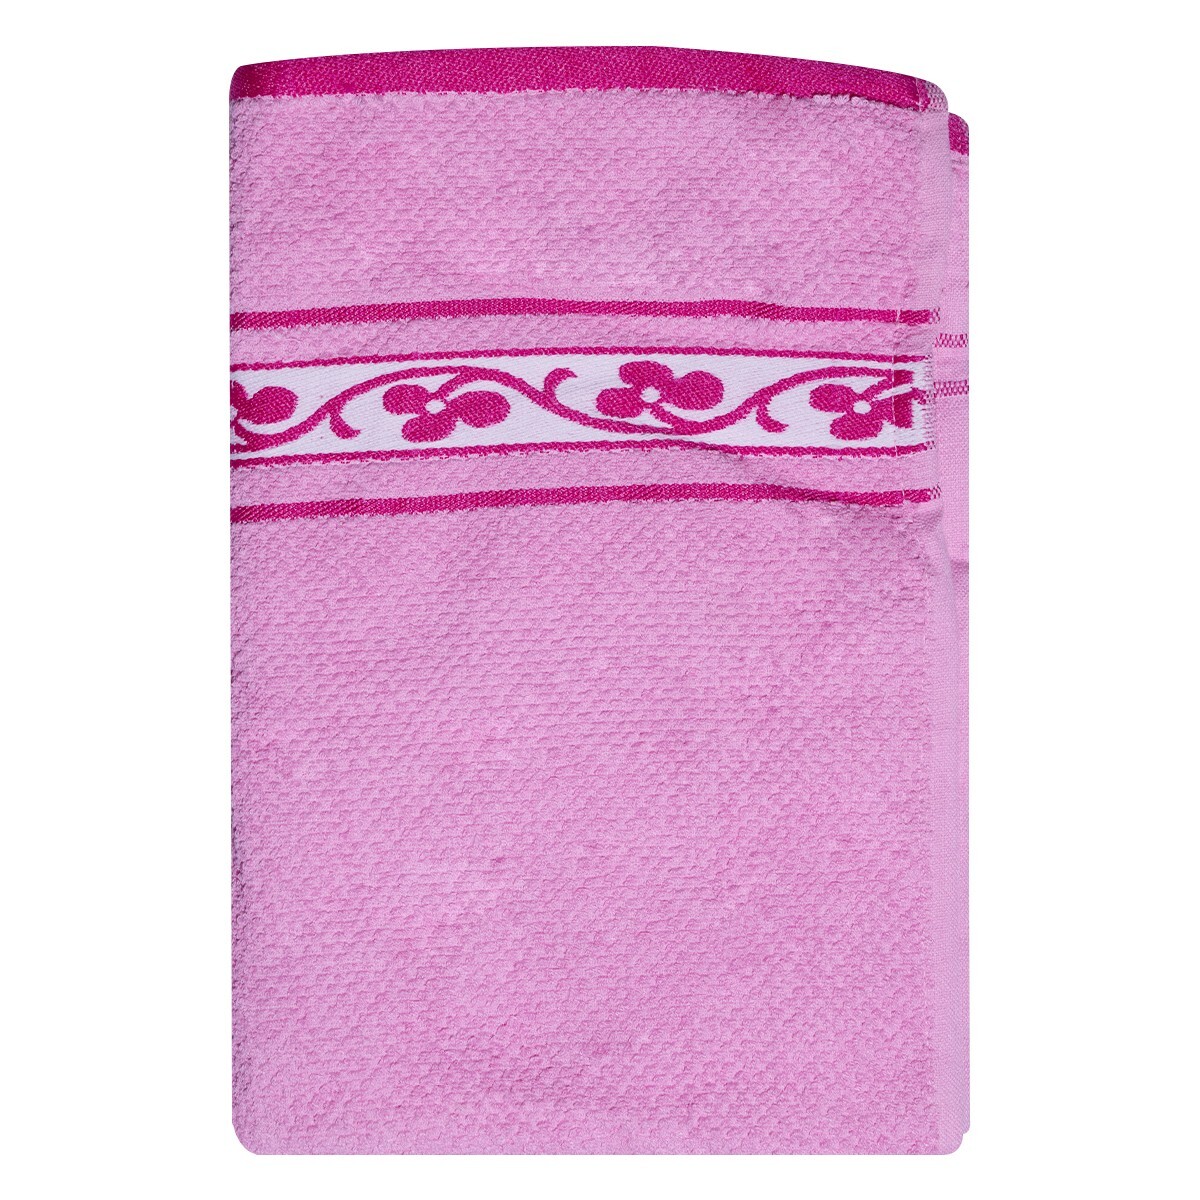 Home Well  Bath Towel PM Assorted Colour